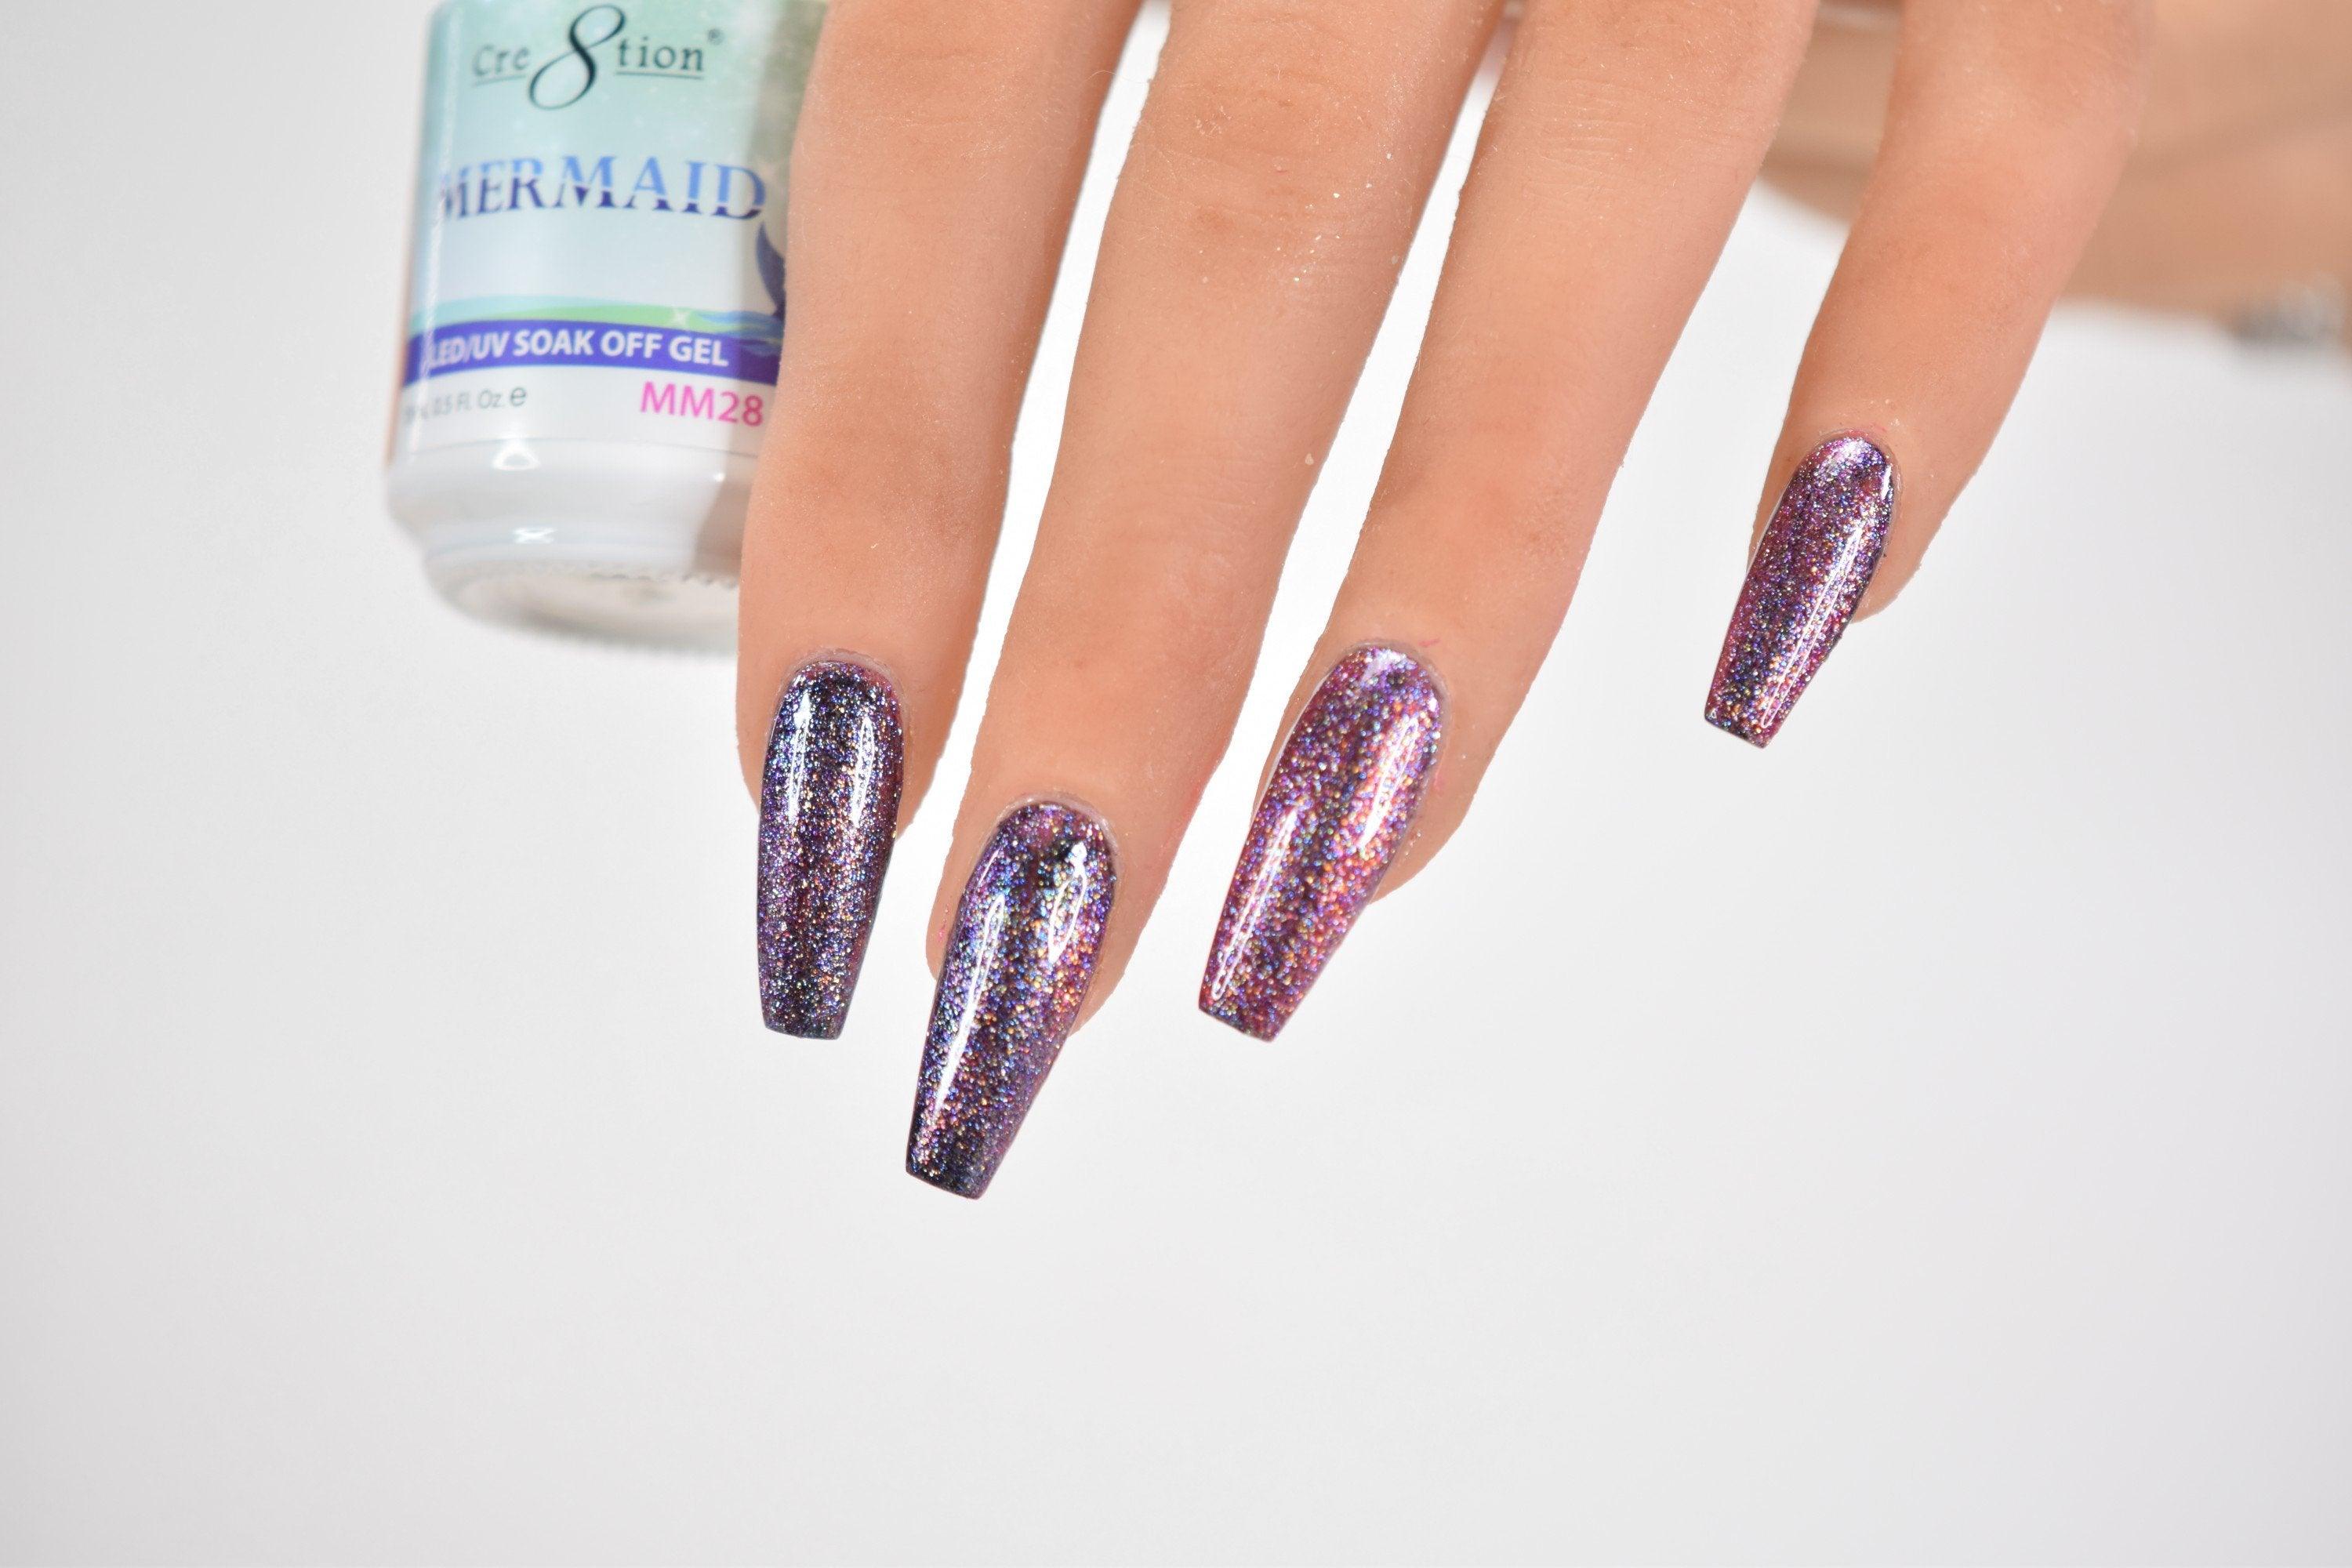 Cre8tion Soak Off Gel - Mermaid Collection #28